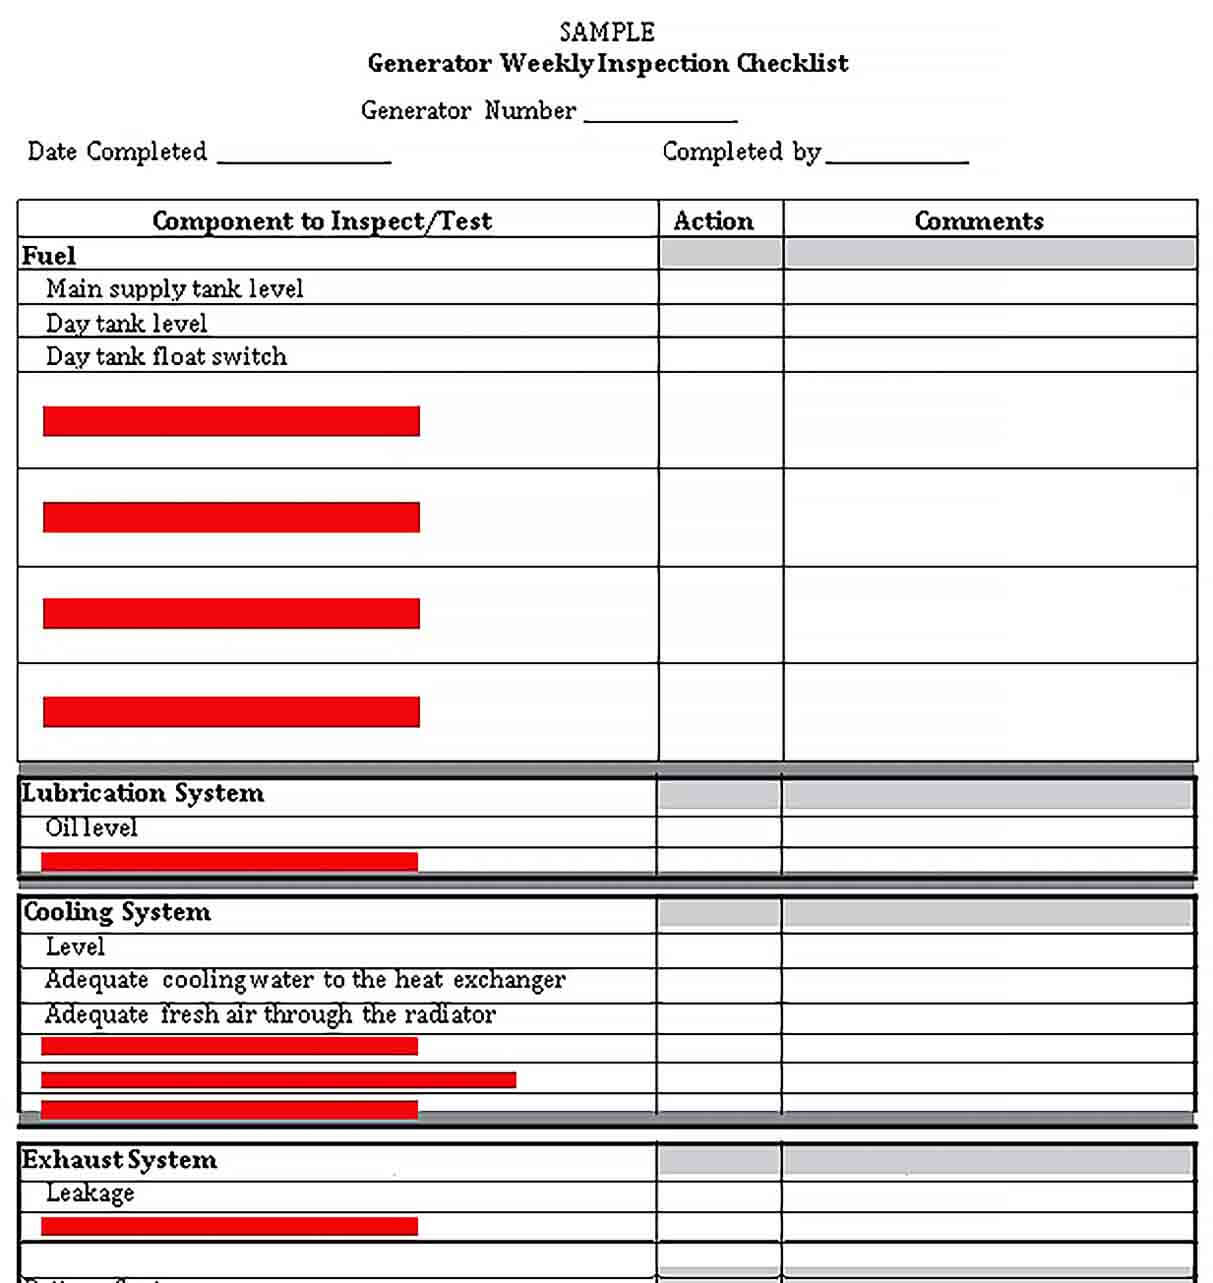 Sample Weekly Inspection Checklist Template